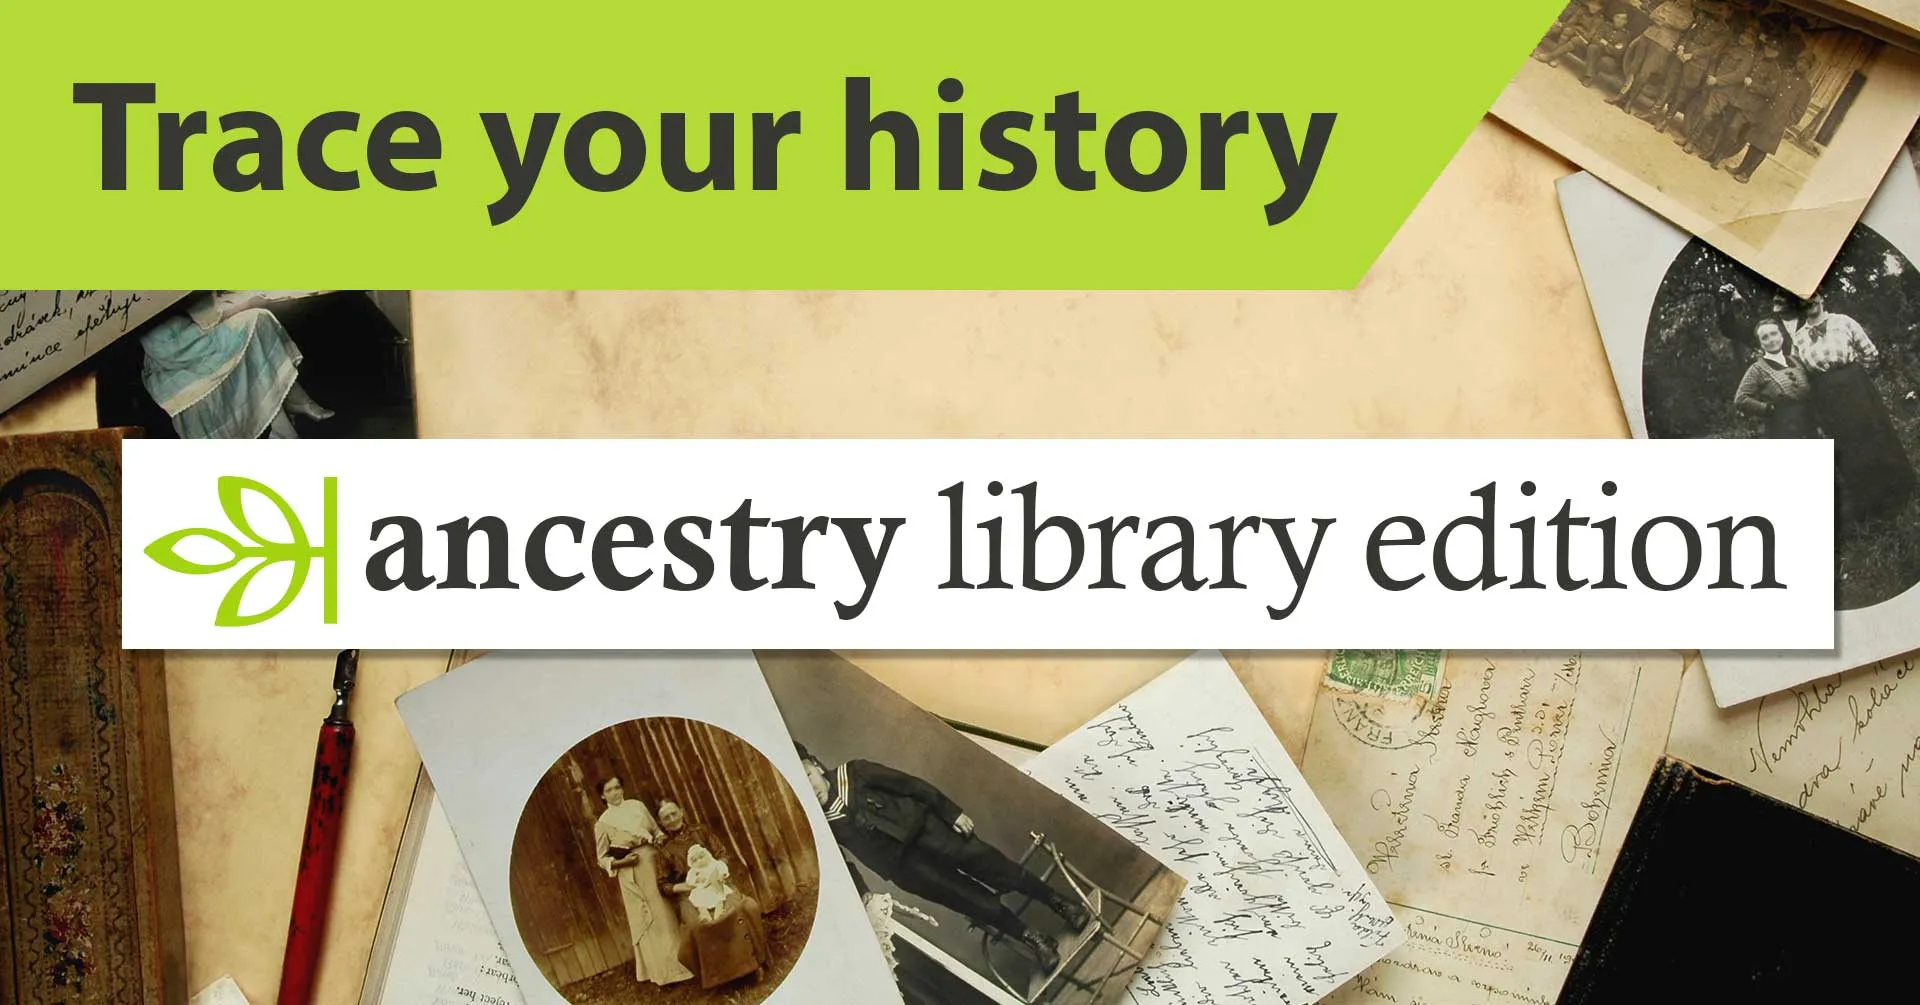 Trace your history - Ancestry Library Edition